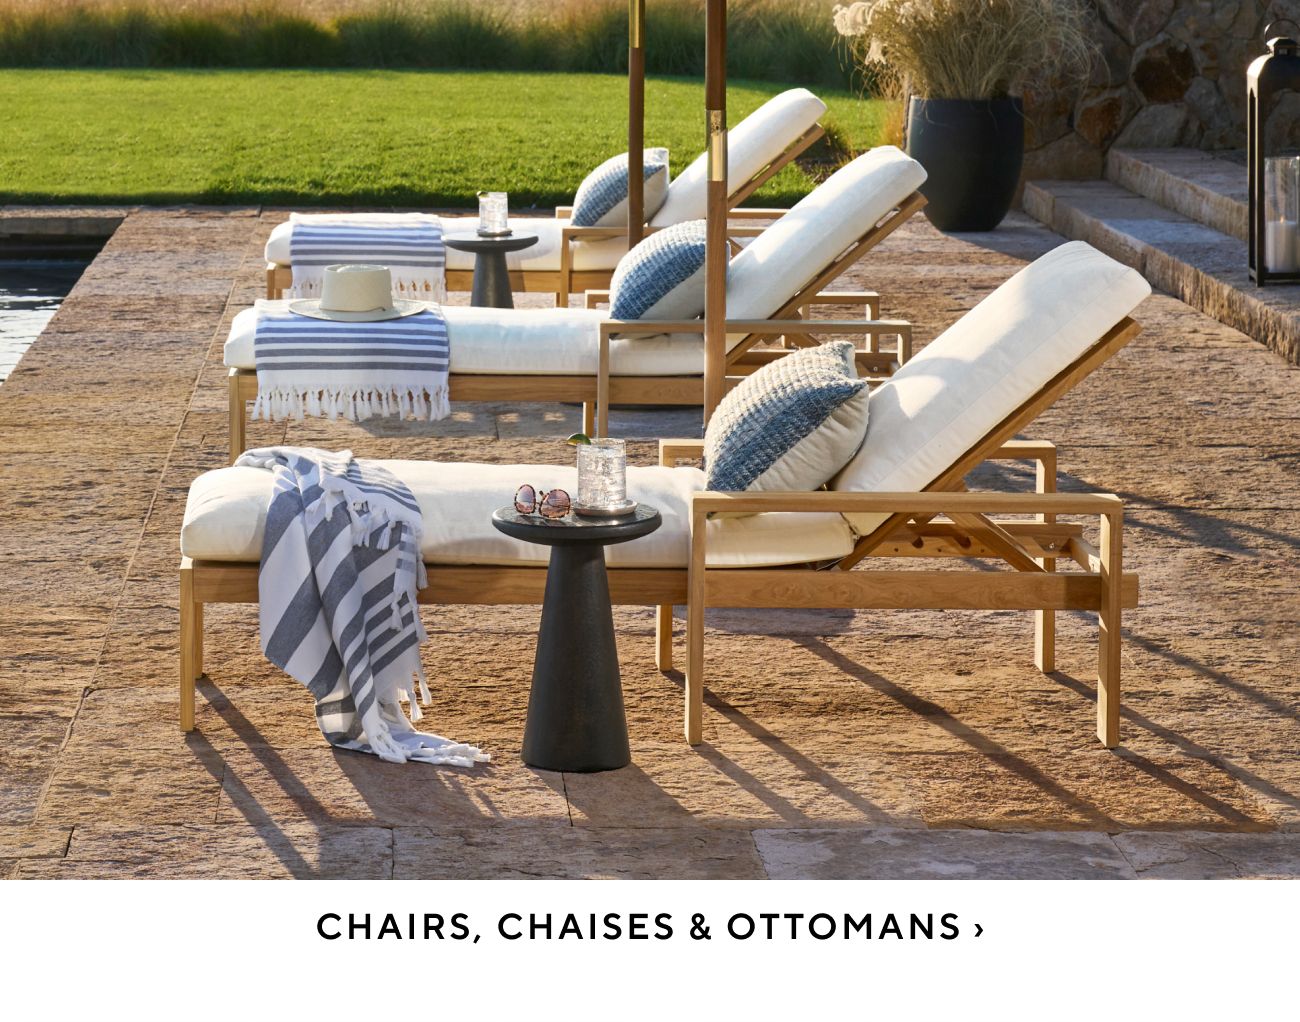  CHAIRS, CHAISES OTTOMANS 